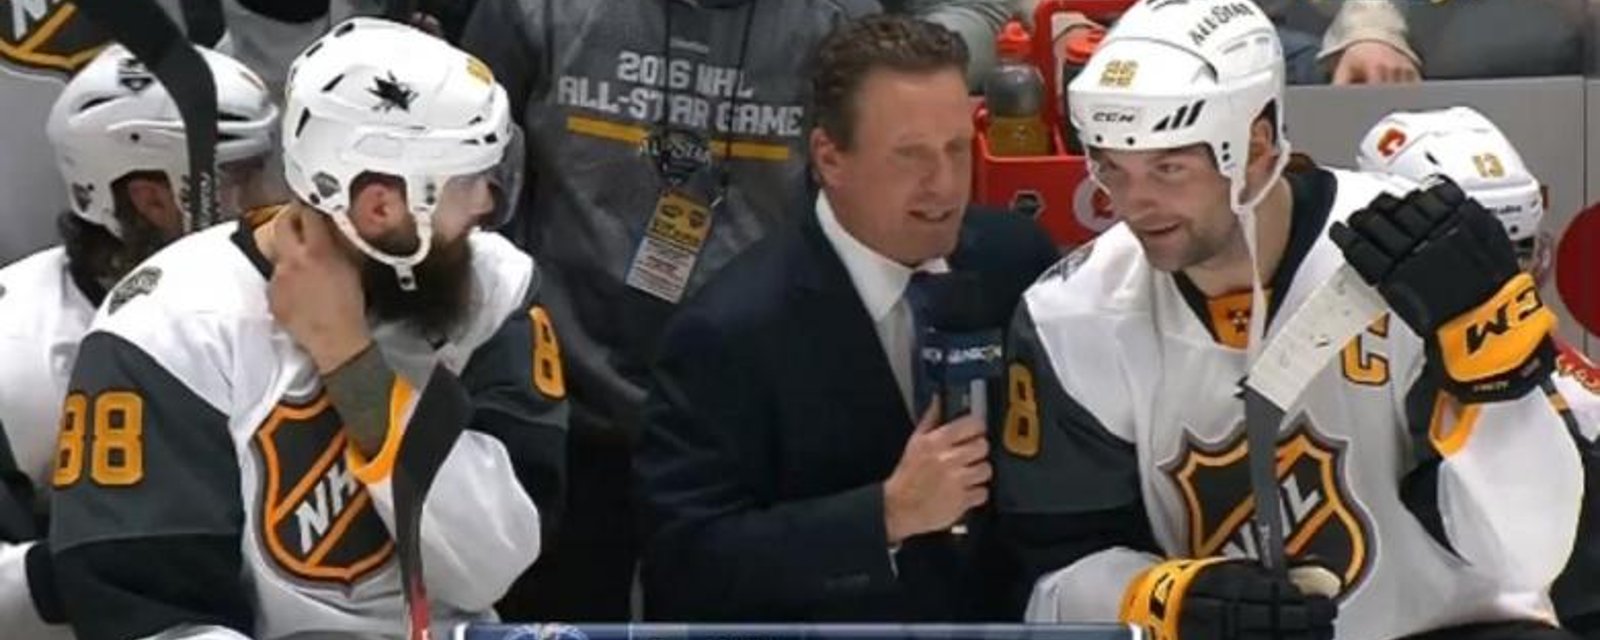 John Scott takes jab at Jeremy Roenick during in-game interview.